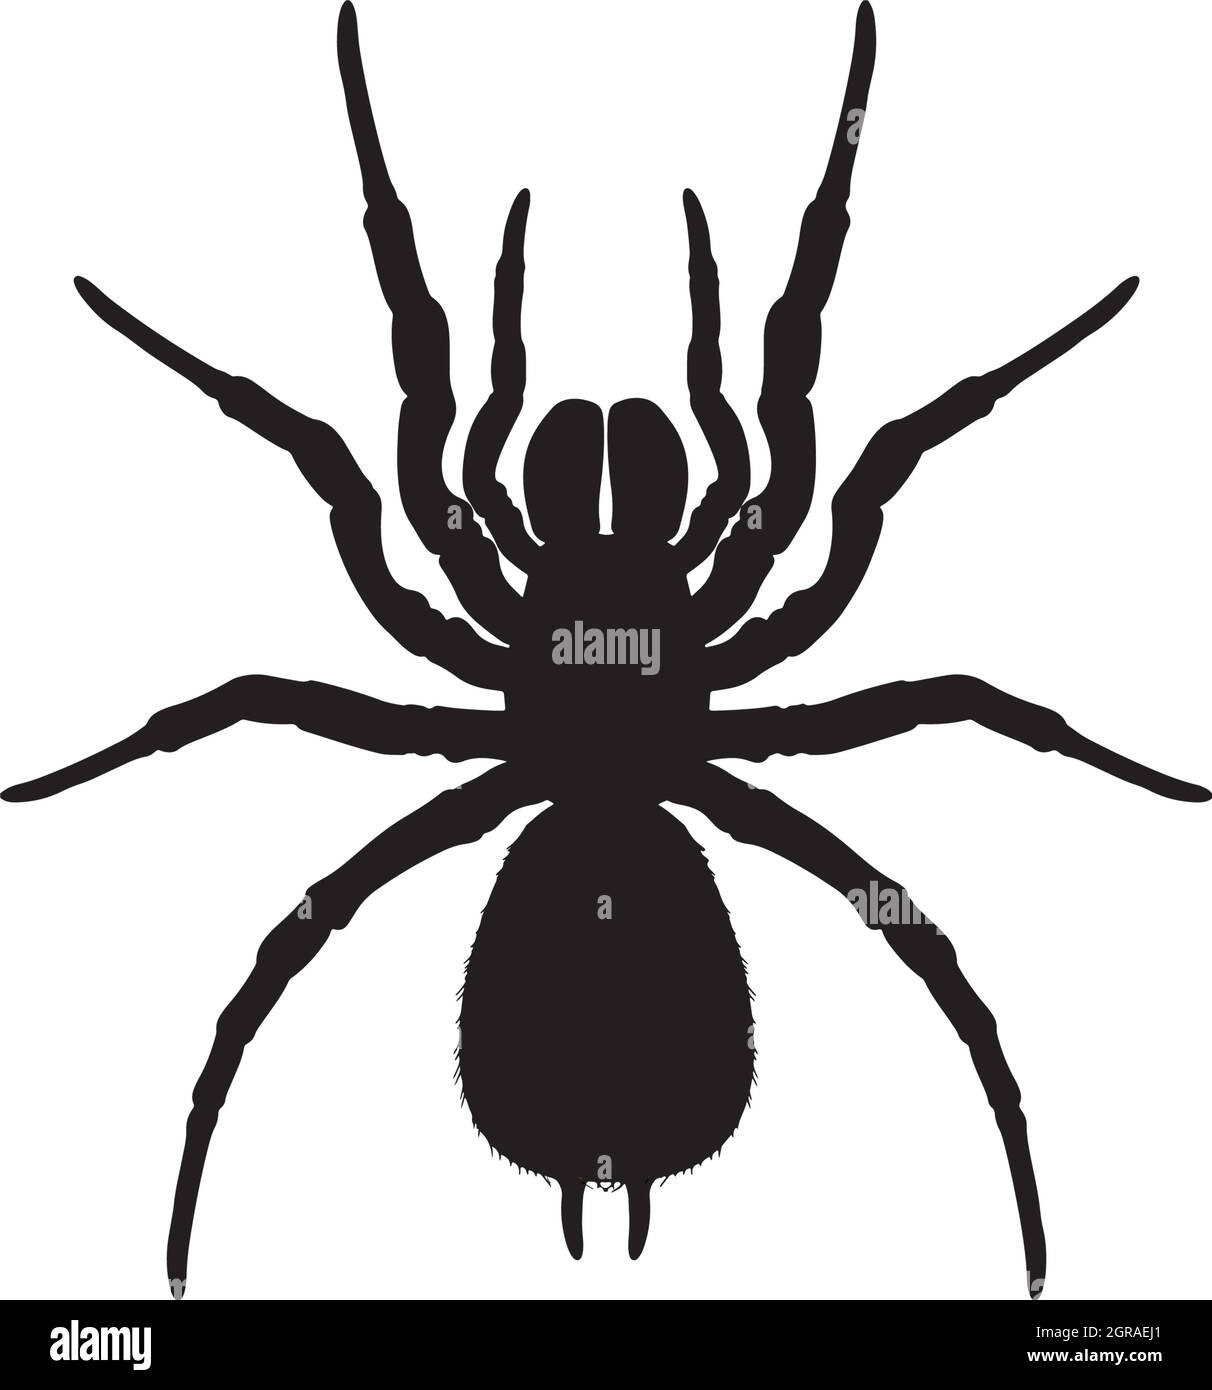 Silhouette of a spider Stock Vector